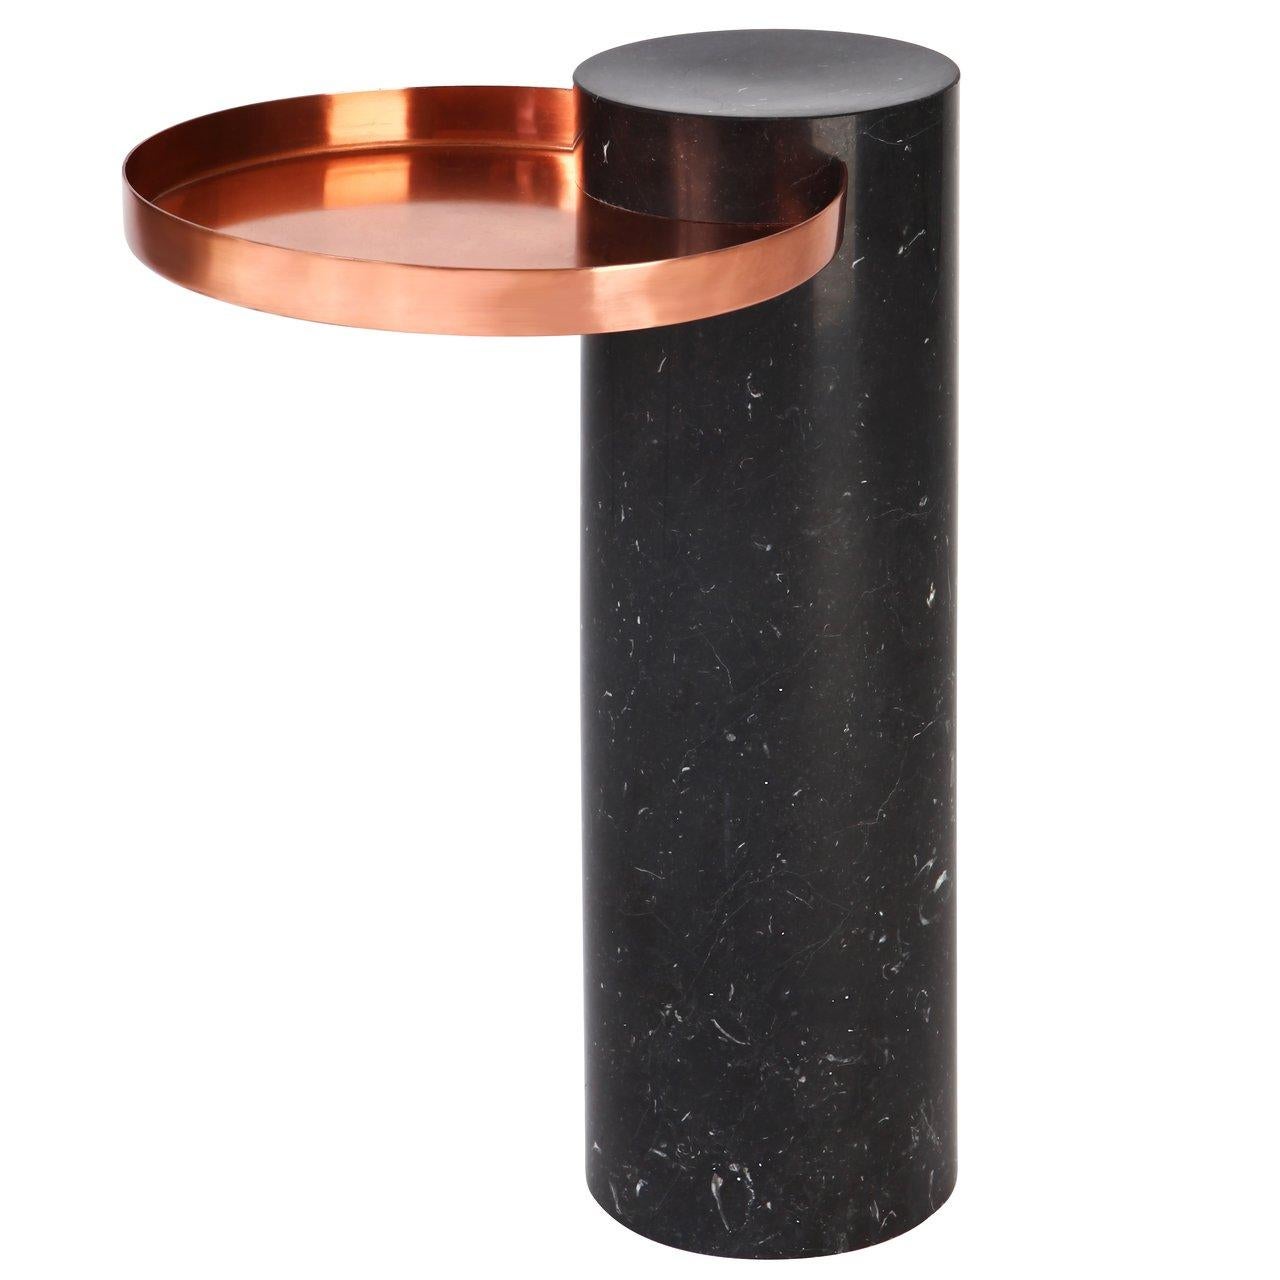 High black marquina marble contemporary guéridon, Sebastian Herkner
Dimensions: D 42 x H 57 cm
Materials: Black Marquina marble, copper

The salute table exists in 3 sizes, 4 different marble stones for the column and 5 different finishes for